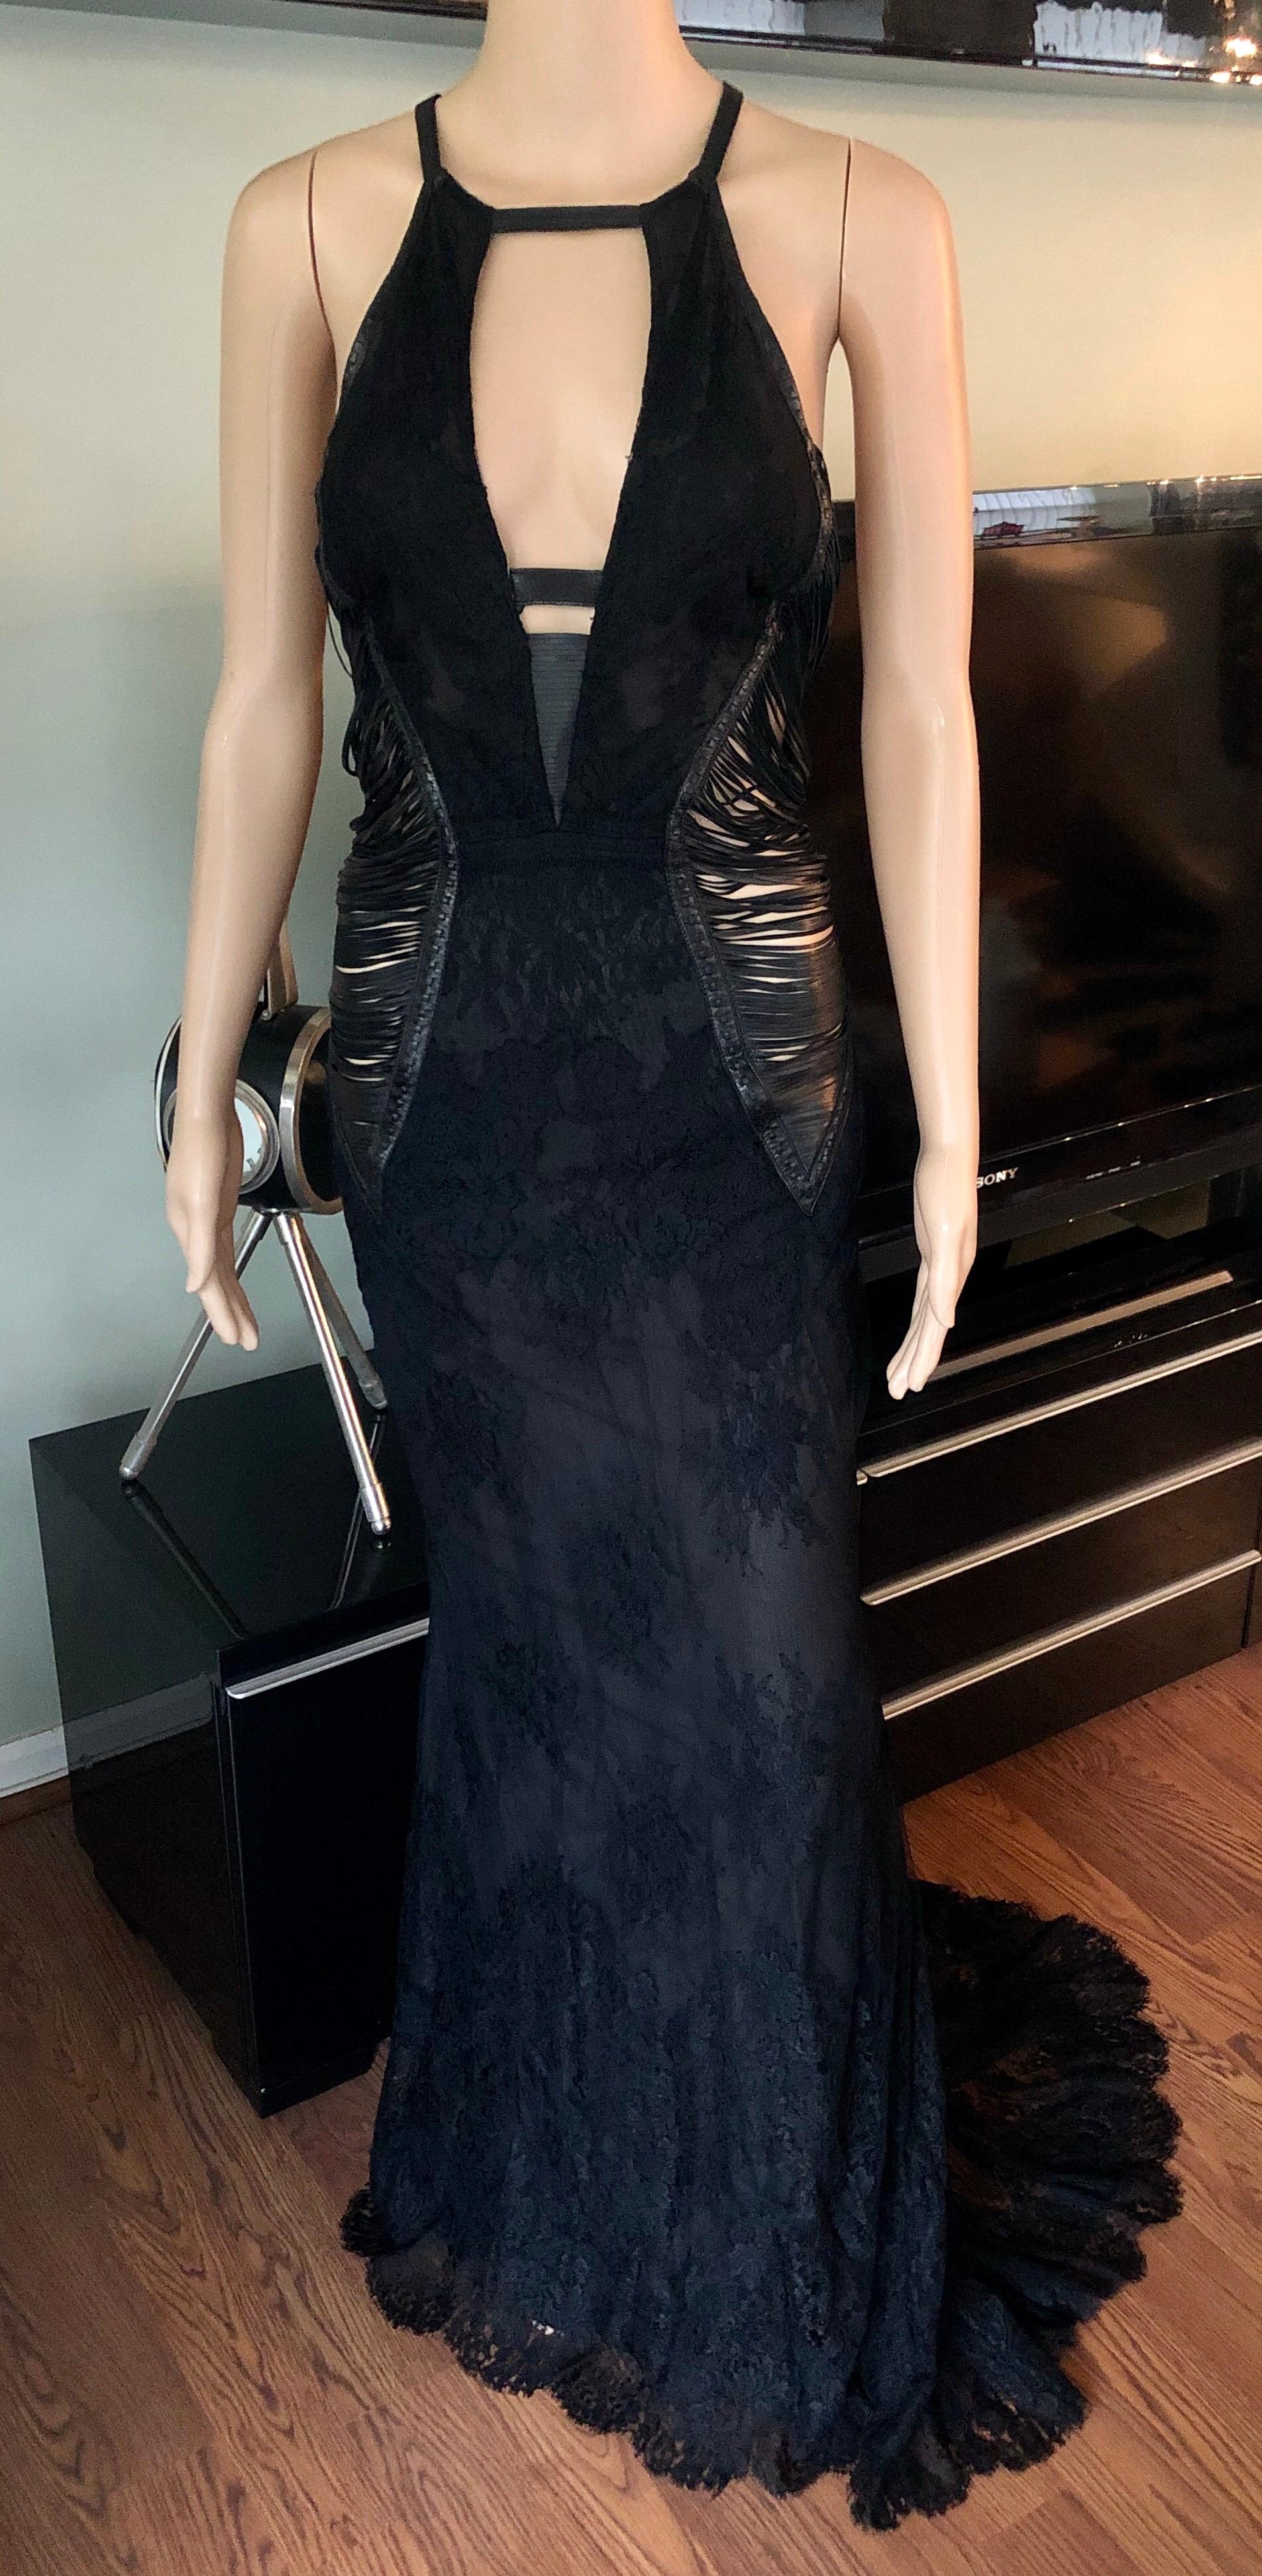 Roberto Cavalli S/S 2013 Leather Cutout Open Back Black Evening Dress Gown For Sale 1